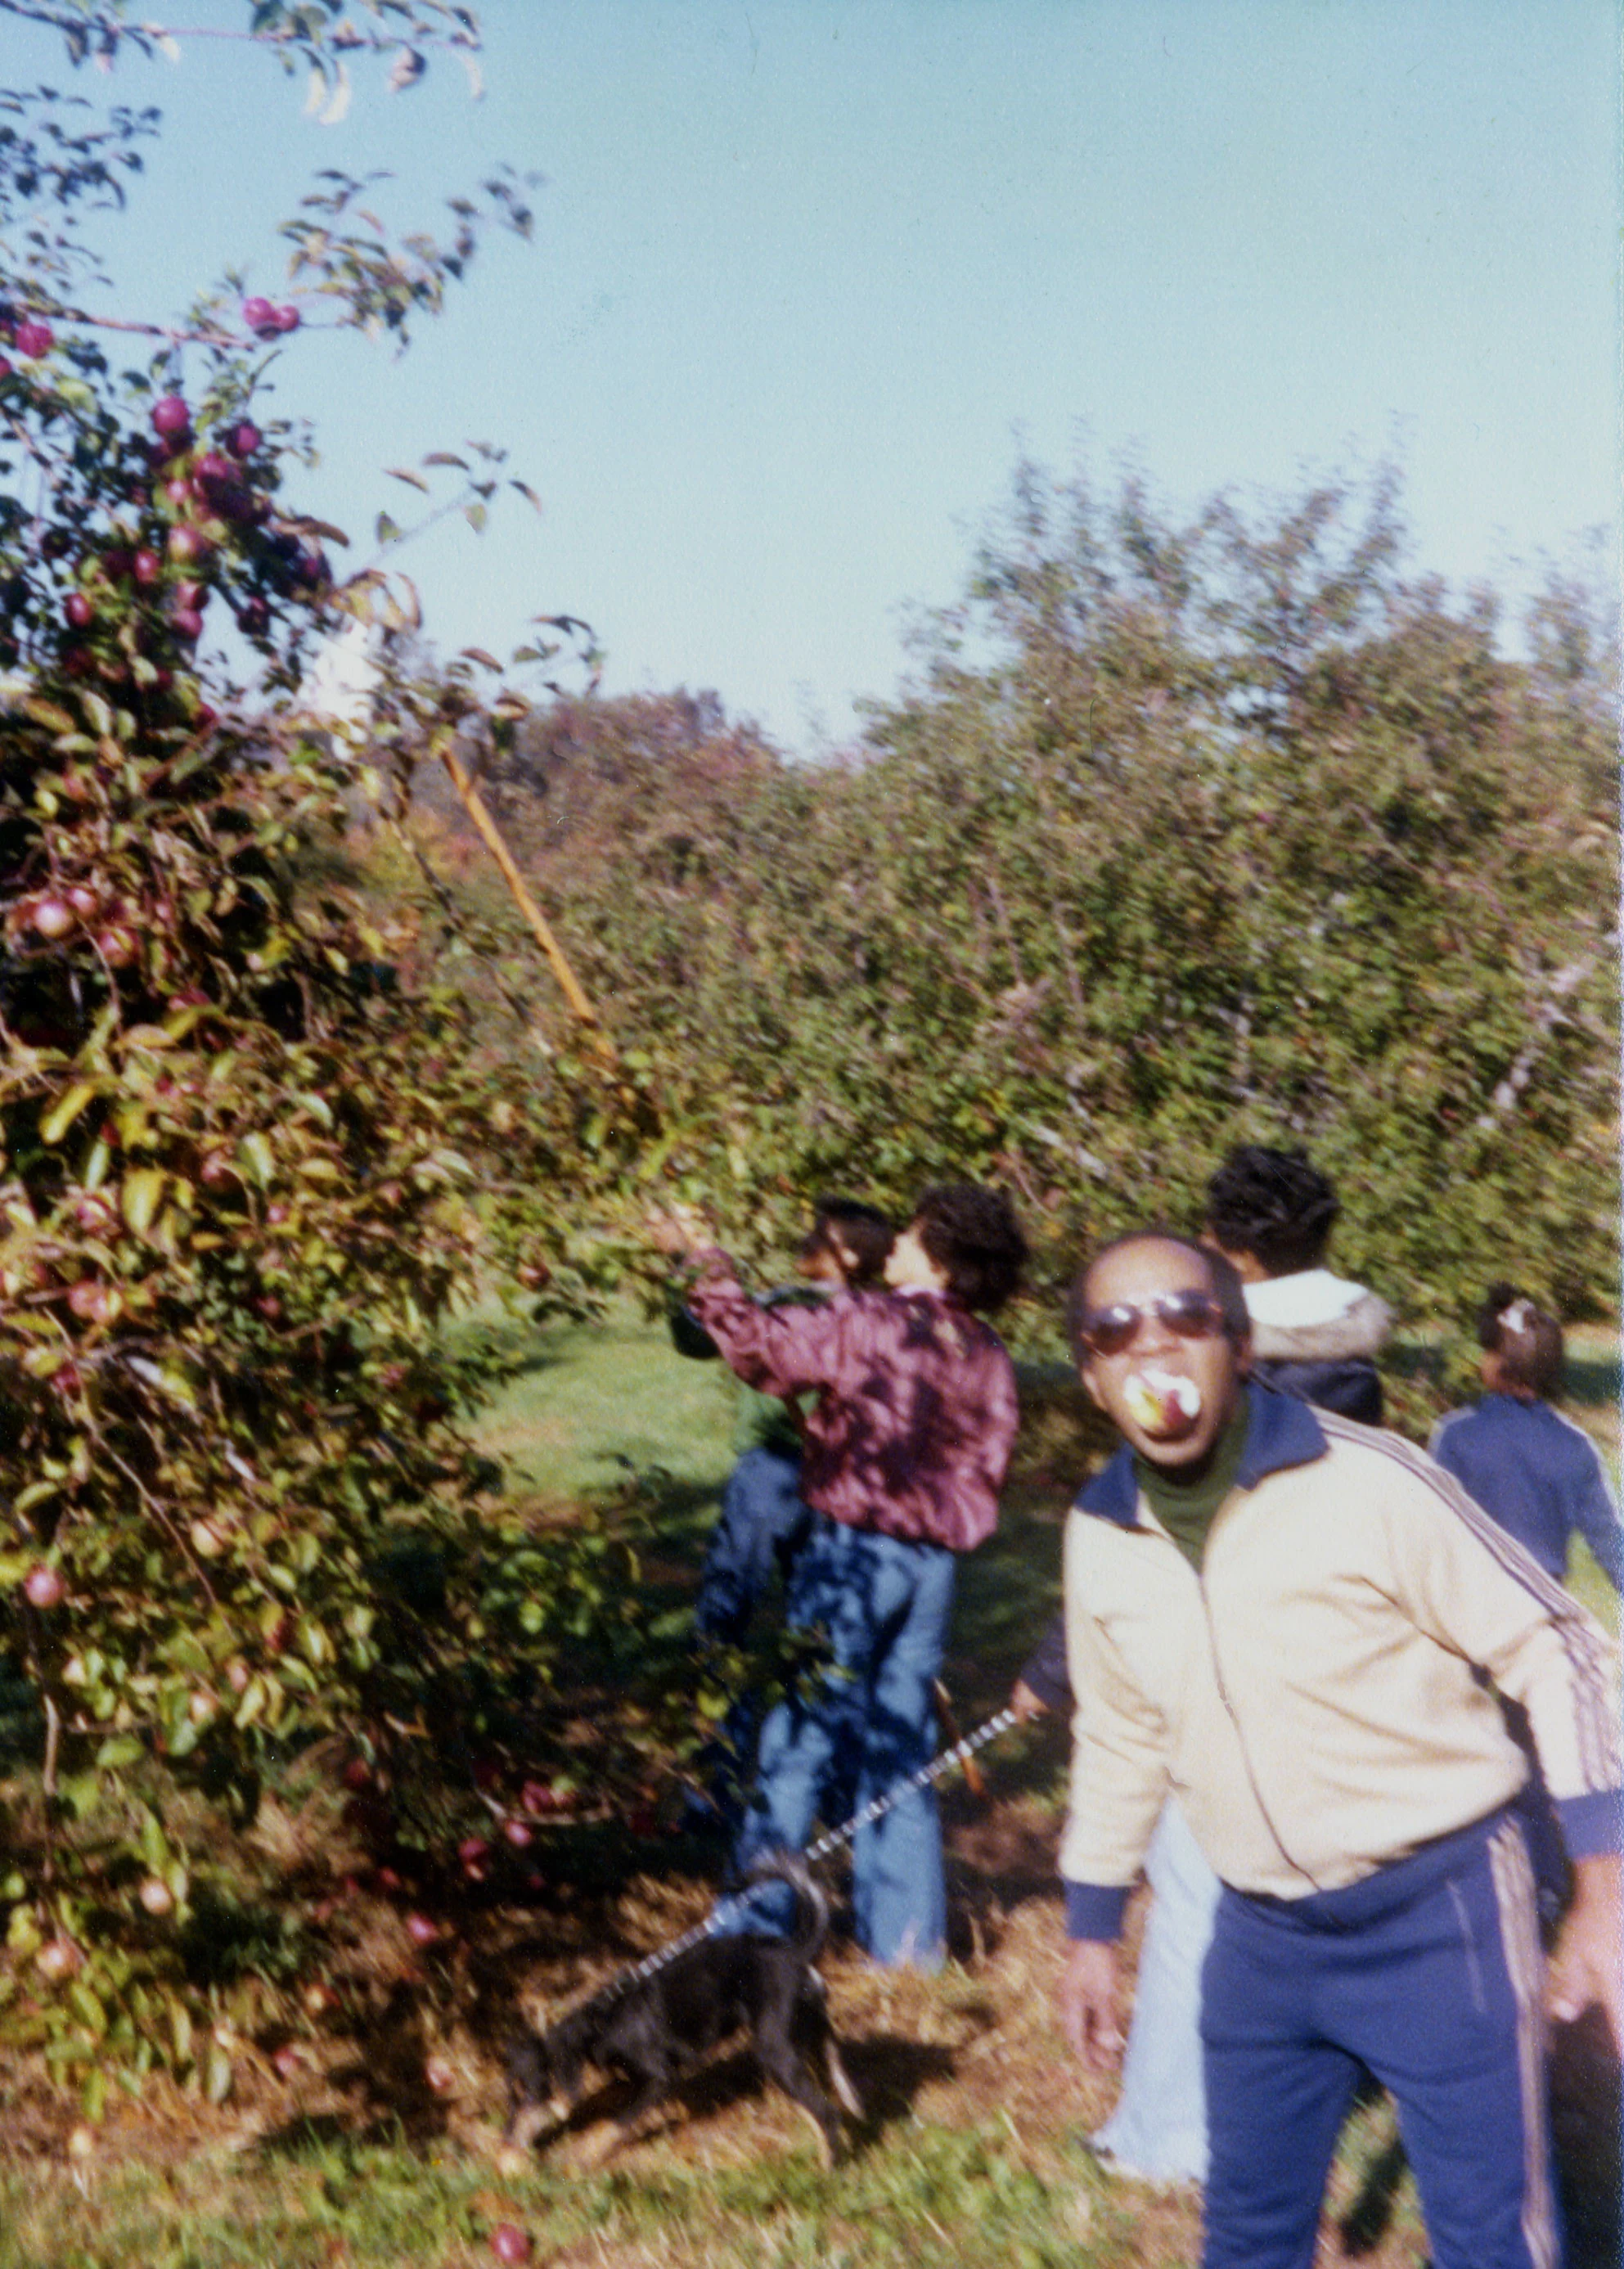 Gerard joking around during a trip to pick apples in Upstate New York. Their dog, Ginger, can be seen in the background. Lisane describes their father as “very much a joker, prankster, kind of mischievous guy.